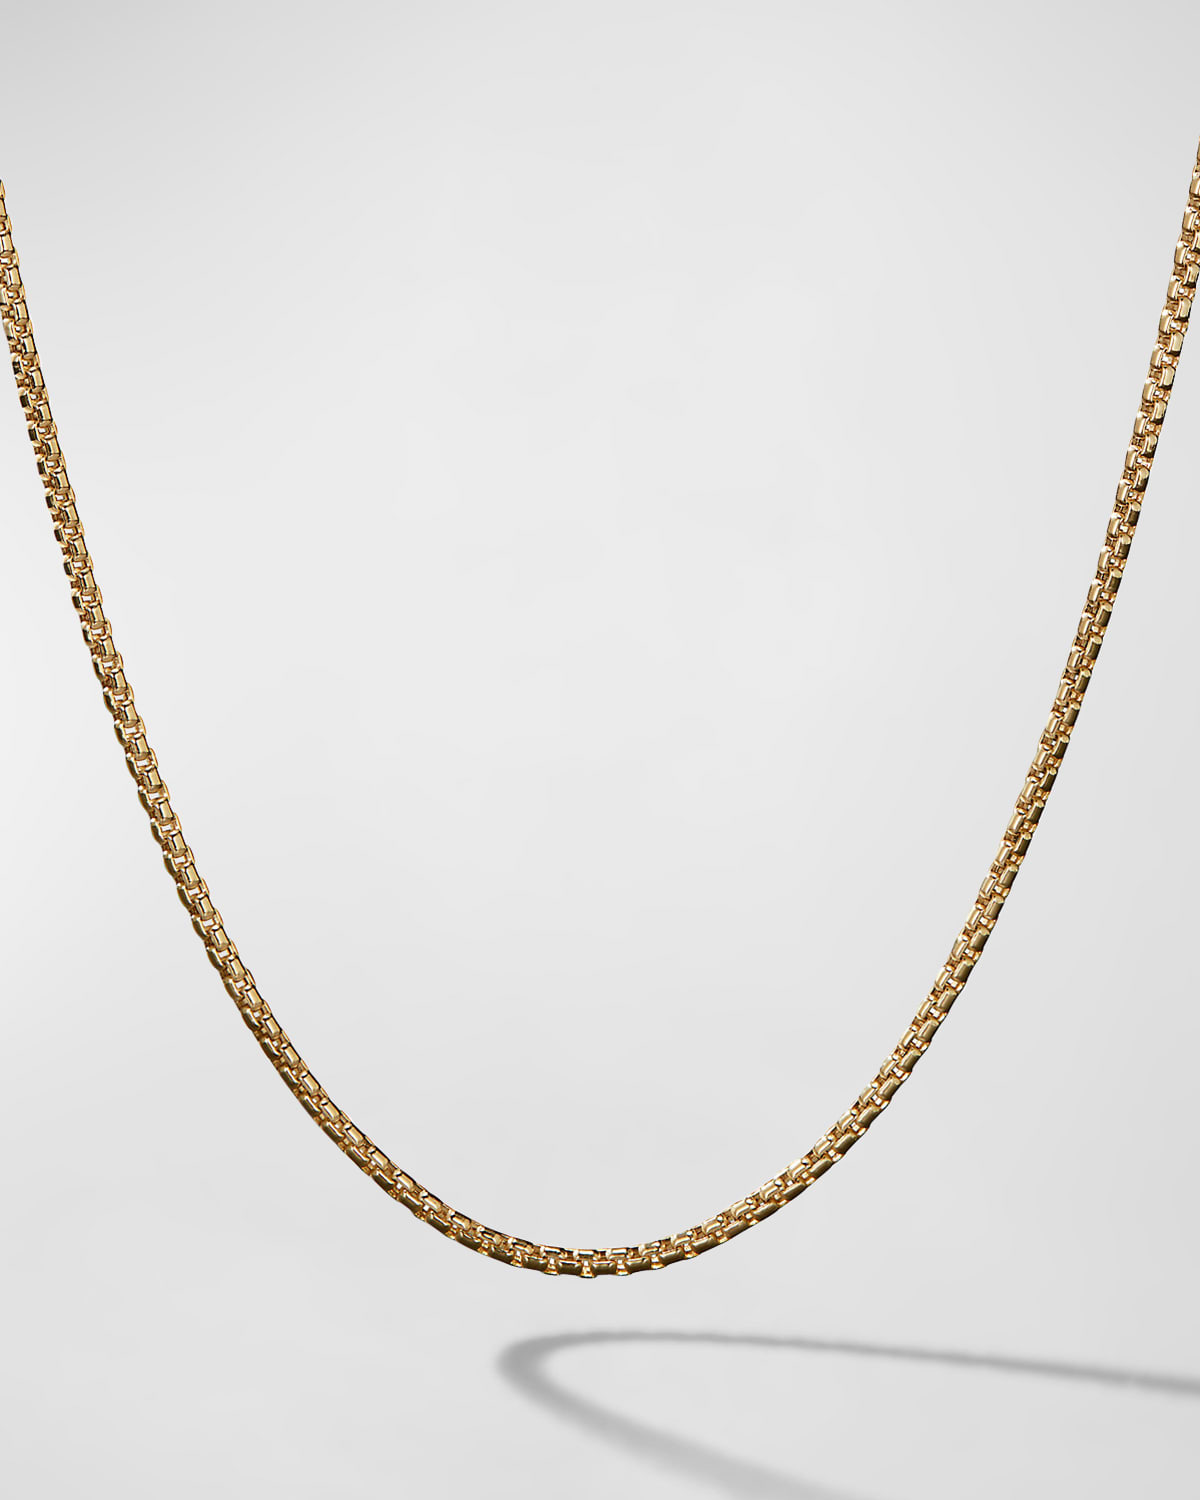 Men's Box Chain Necklace in 18K Gold, 1.7mm, 22"L